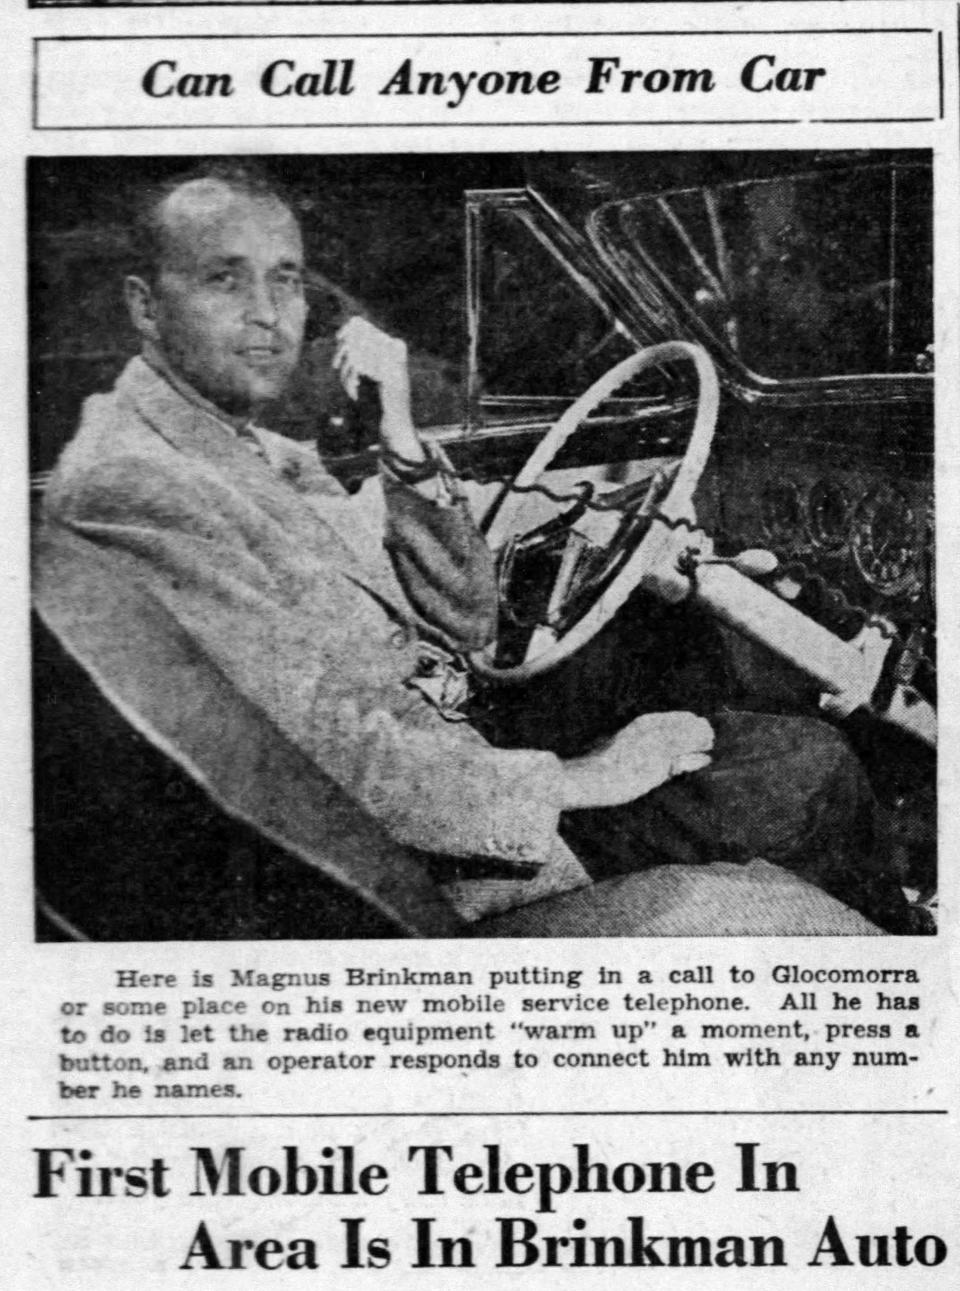 Sheboygan Redskins President Magnus Brinkman was featured as the first mobile telephone owner in Sheboygan, according to a July 16, 1947 Sheboygan Press story.